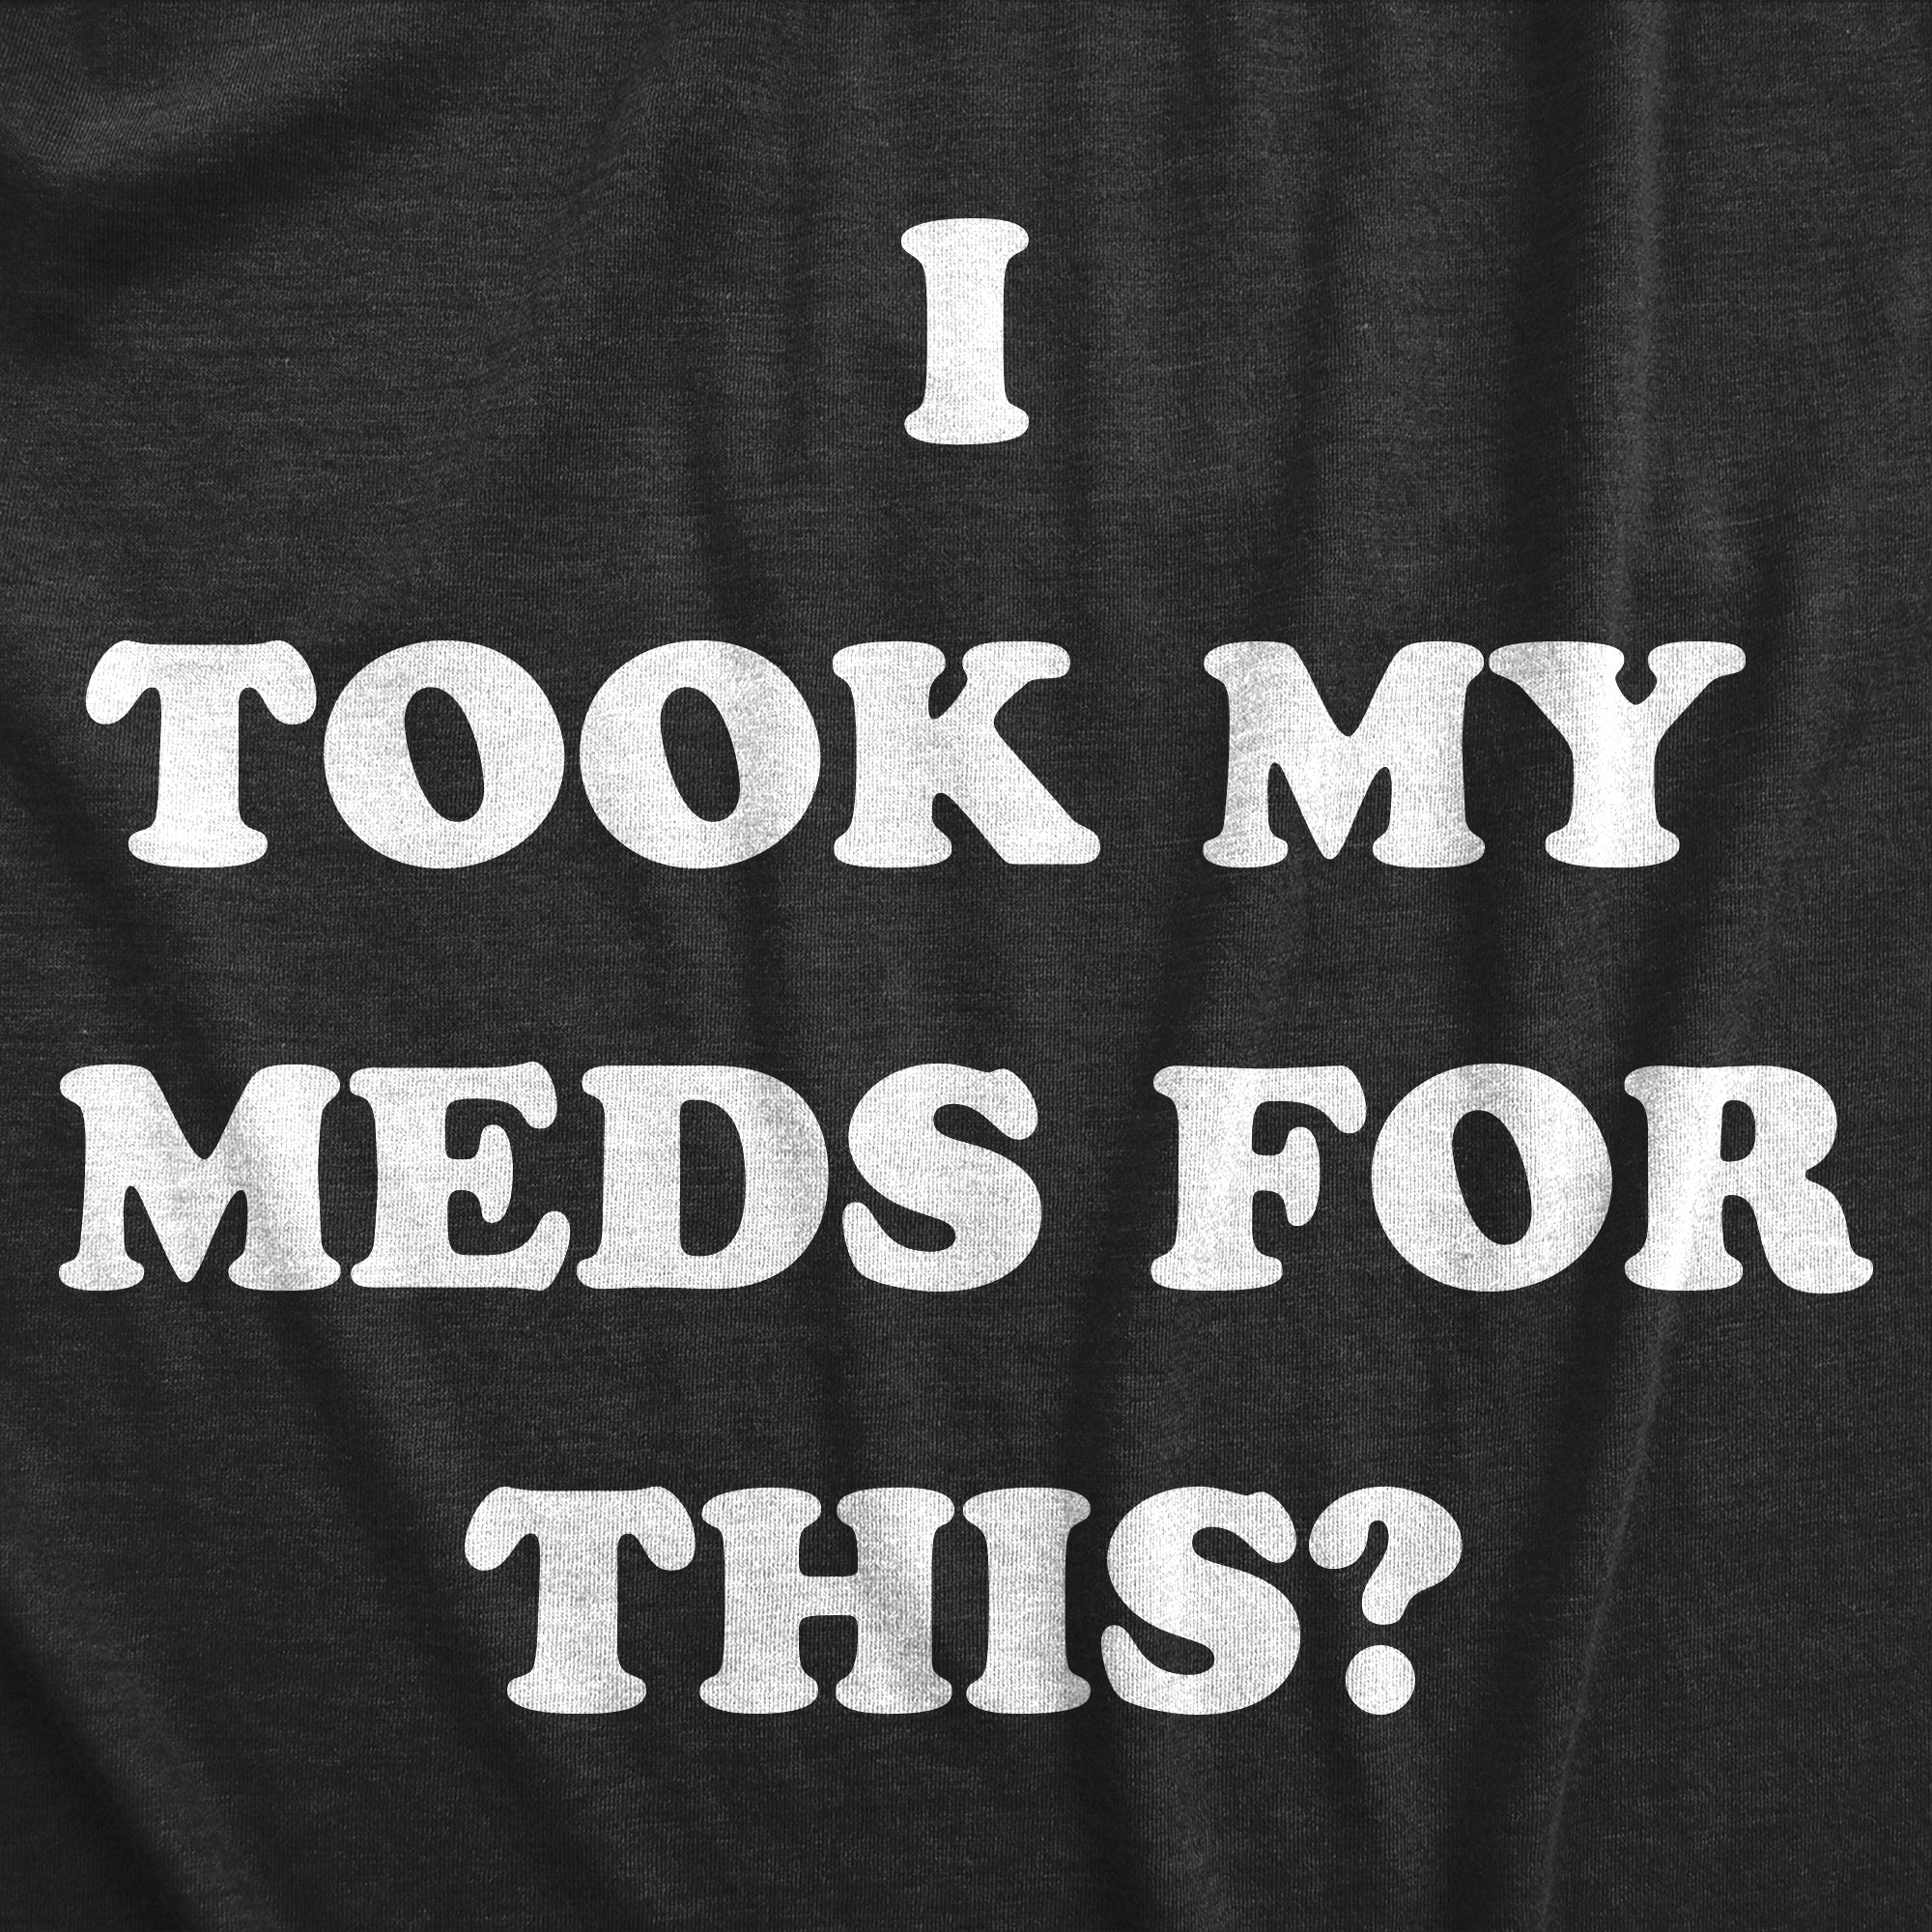 Funny Heather Black - MEDS I Took My Meds For This Mens T Shirt Nerdy Sarcastic Tee